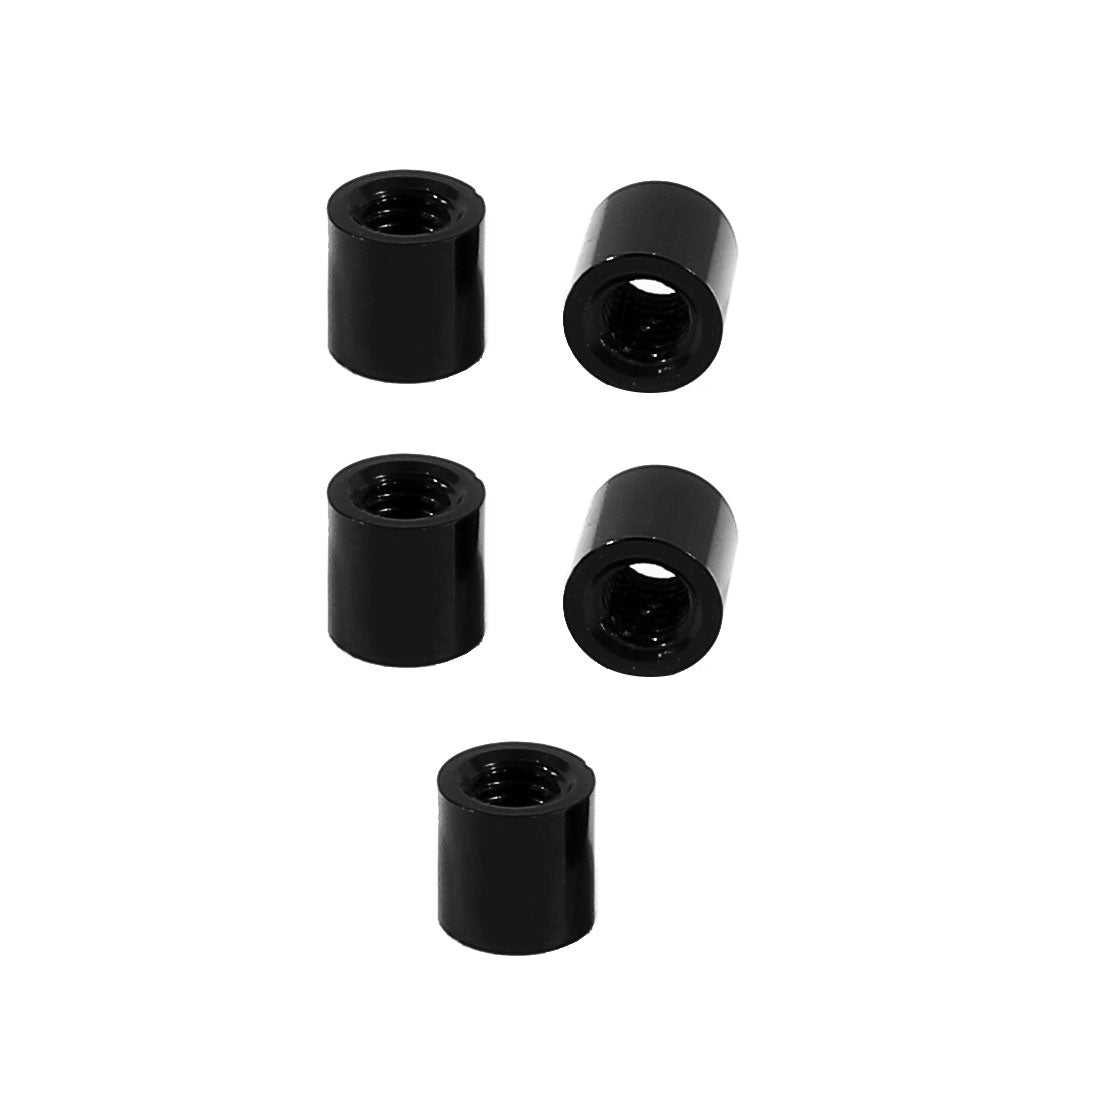 uxcell Uxcell 5Pcs M3 x 5mm Round Aluminum Column Alloy Standoff Spacer Stud Fastener for Quadcopter Black